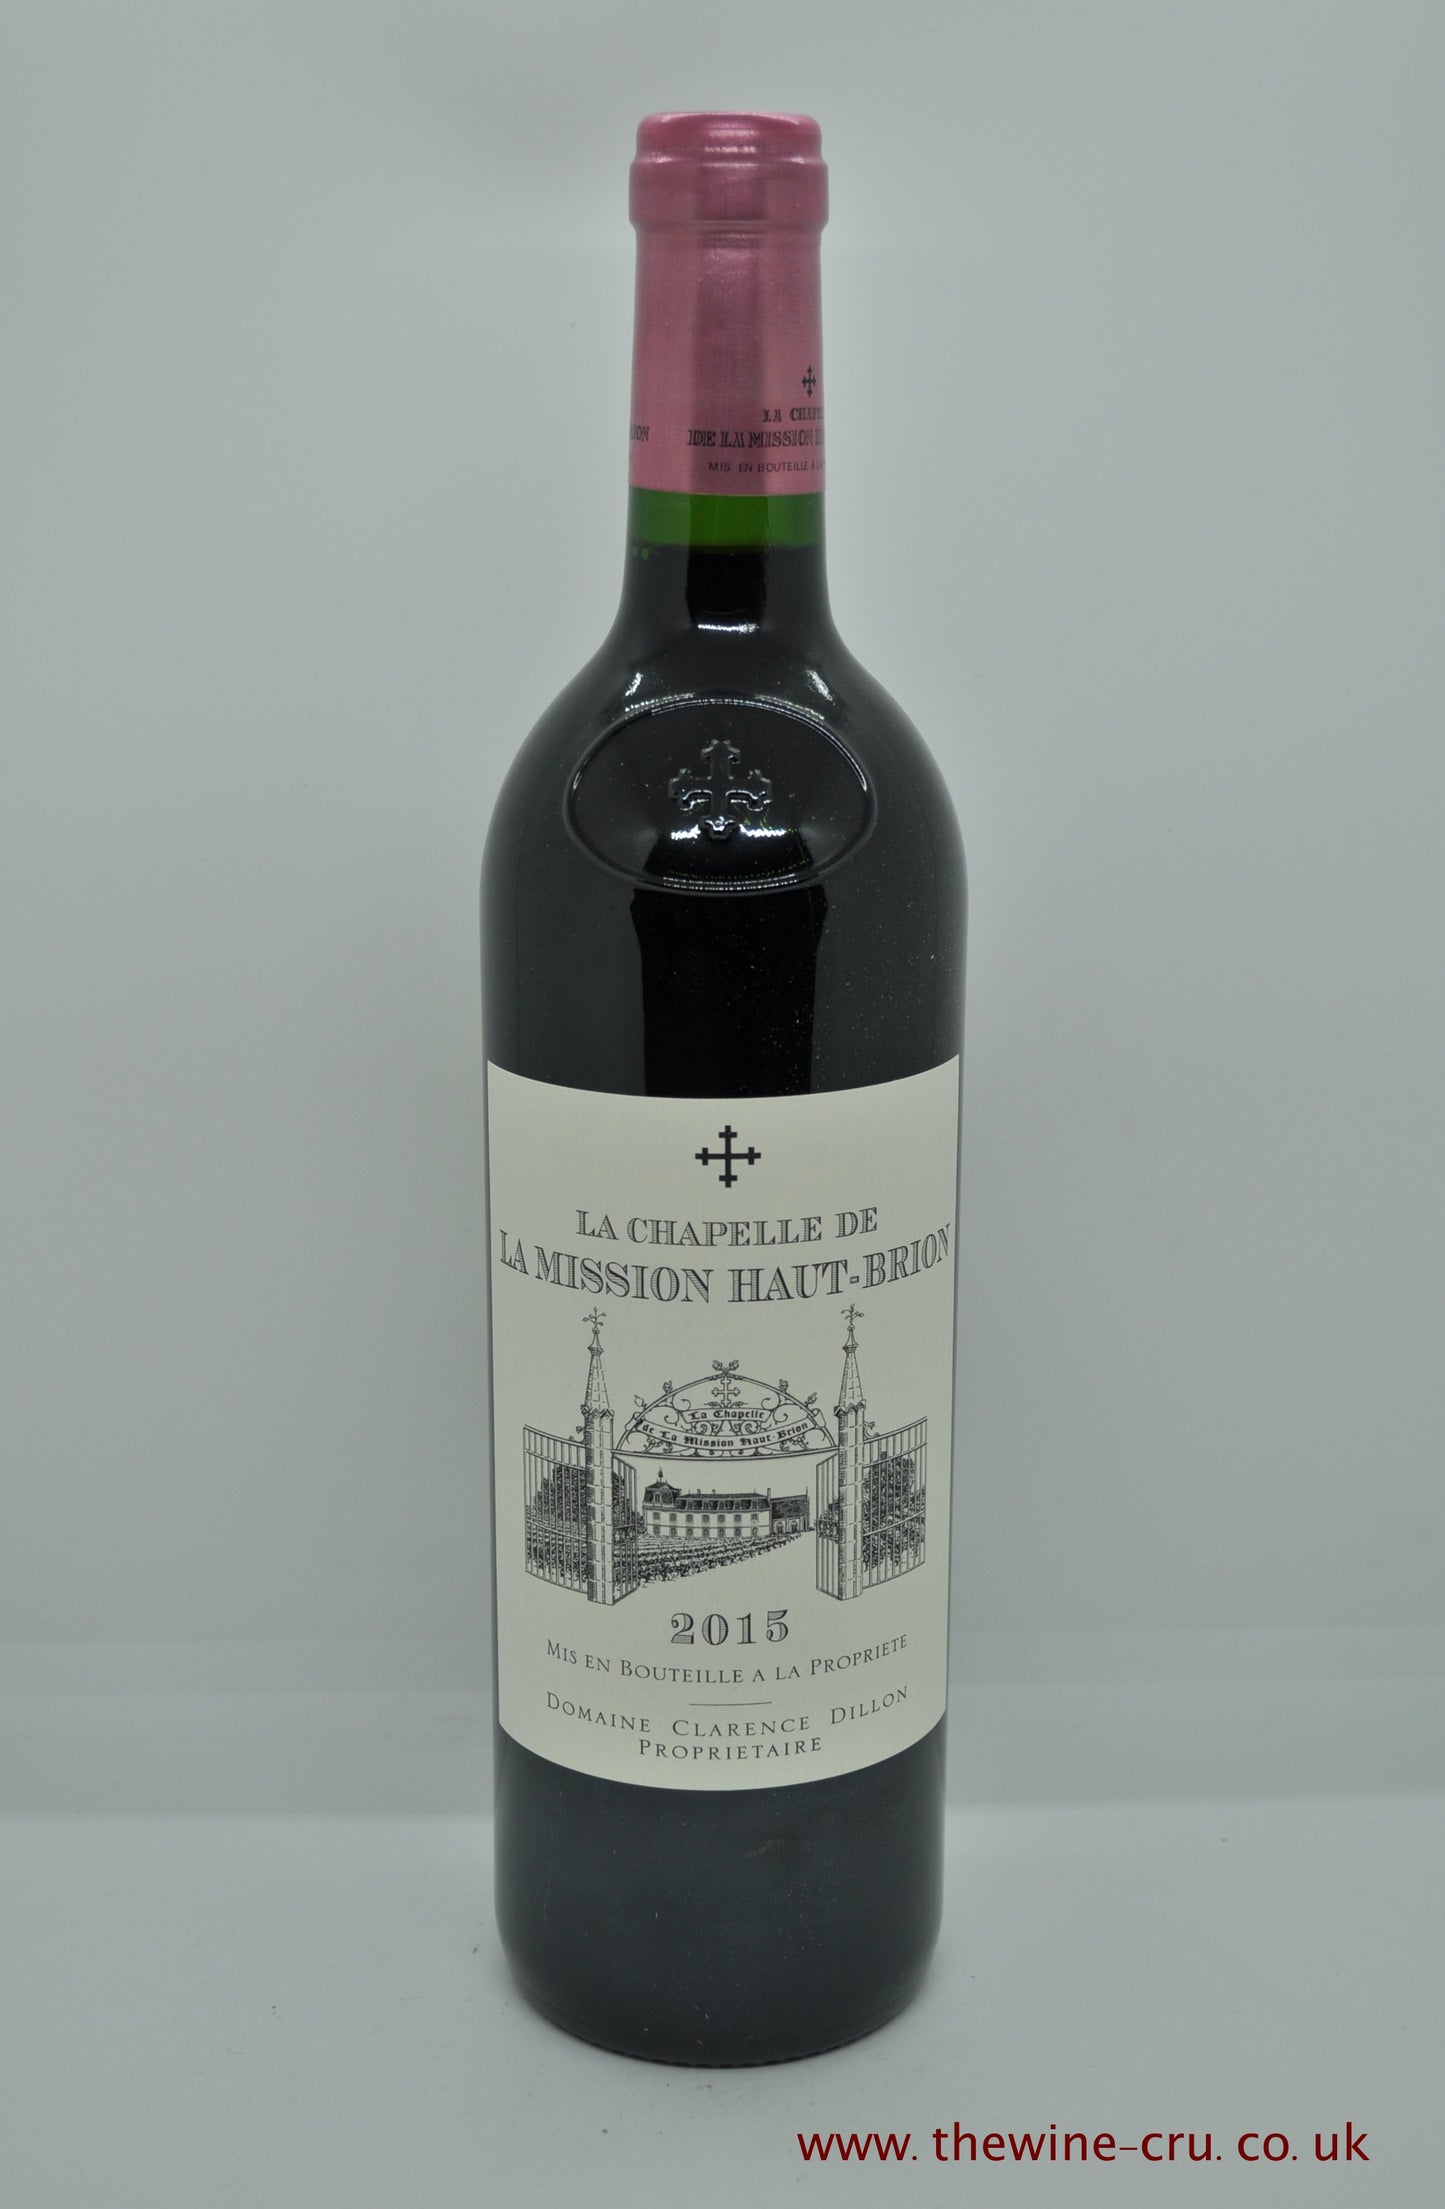 2015 vintage red wine. La Chapelle De La Mission Haut Brion 2015. France Bordeaux. Immediate delivery. Free local delivery. Gift wrapping available.